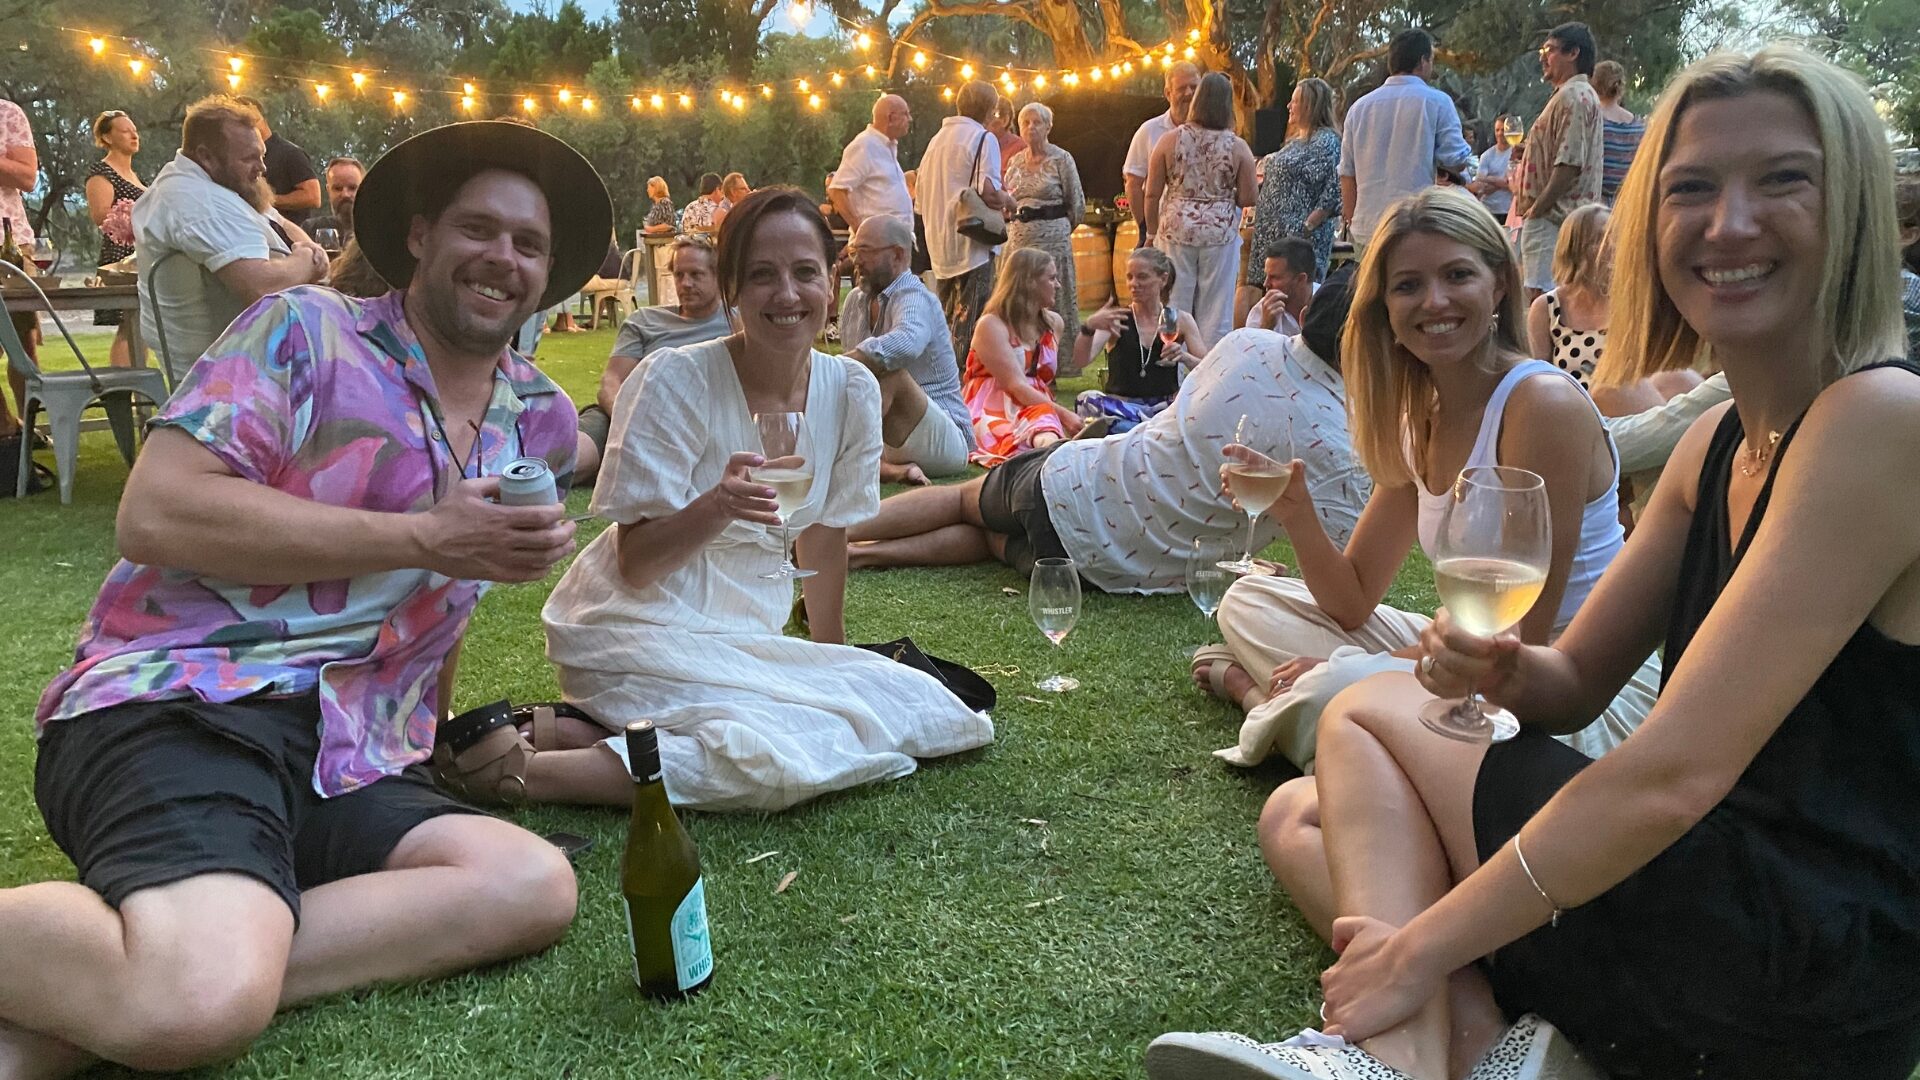 Guests enjoying an evening on the lawn at Whistler Wines